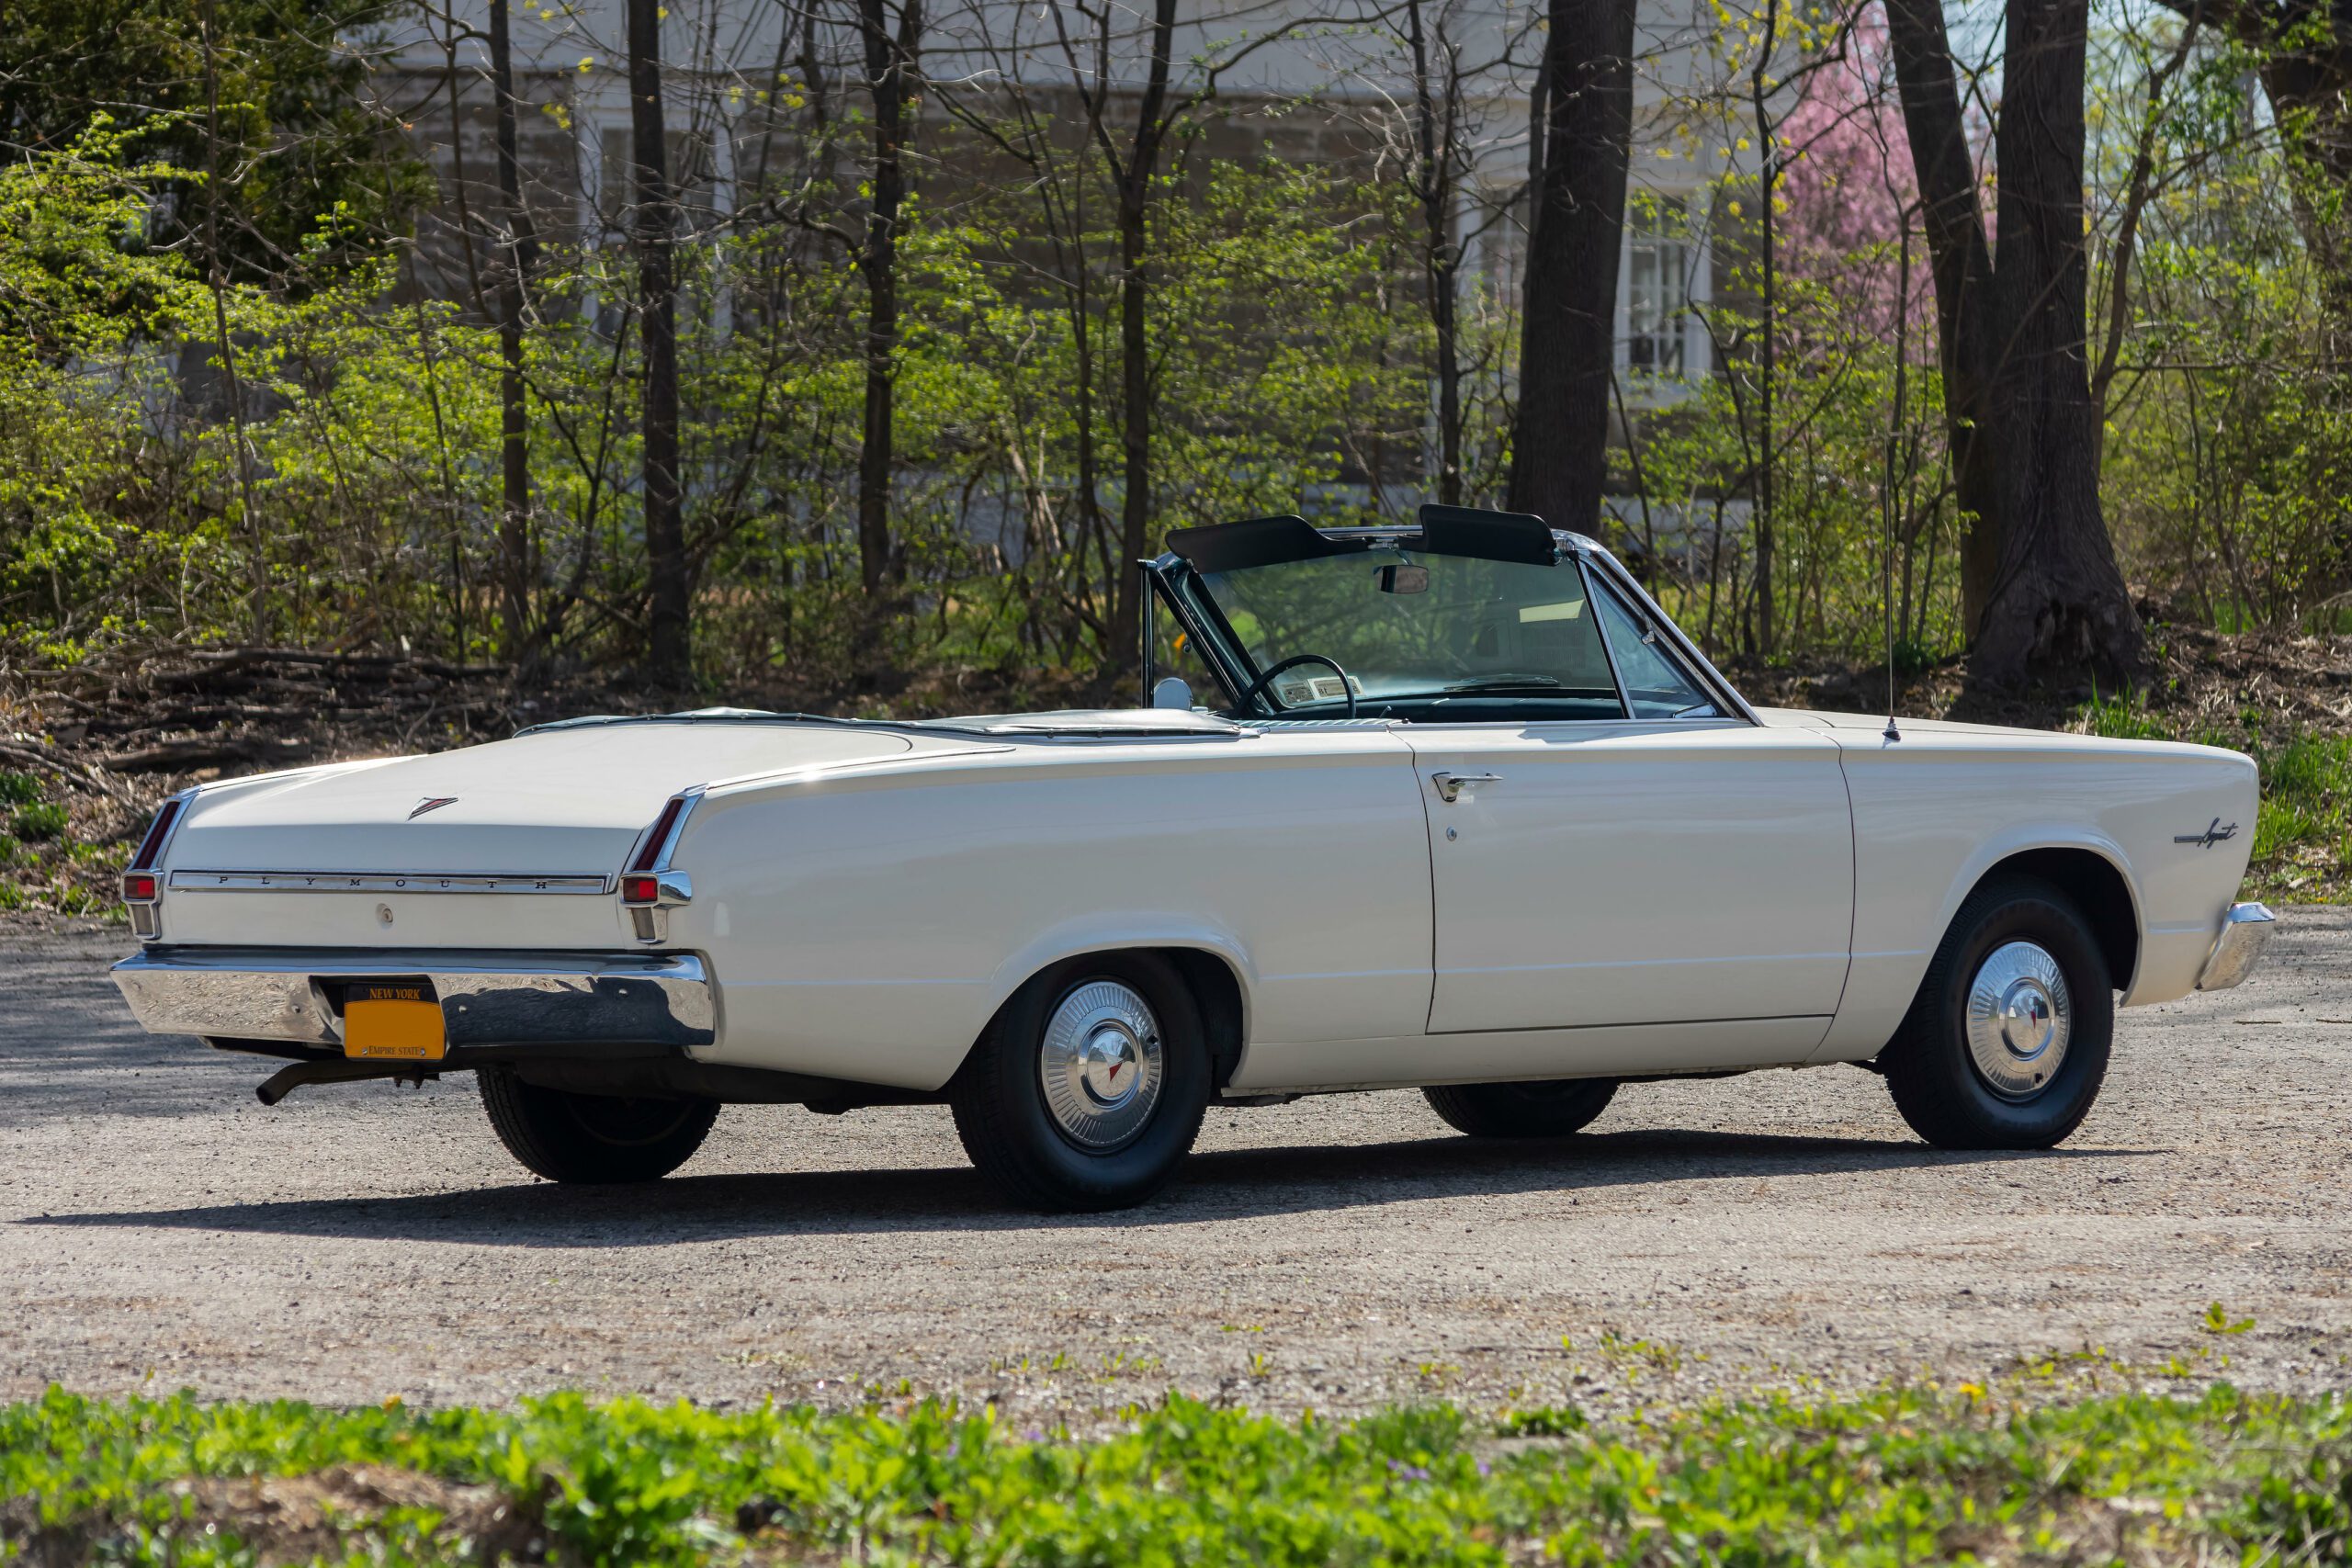 1966 Plymouth Valiant Signet Convertible, Plymouth, Plymouth Valiant